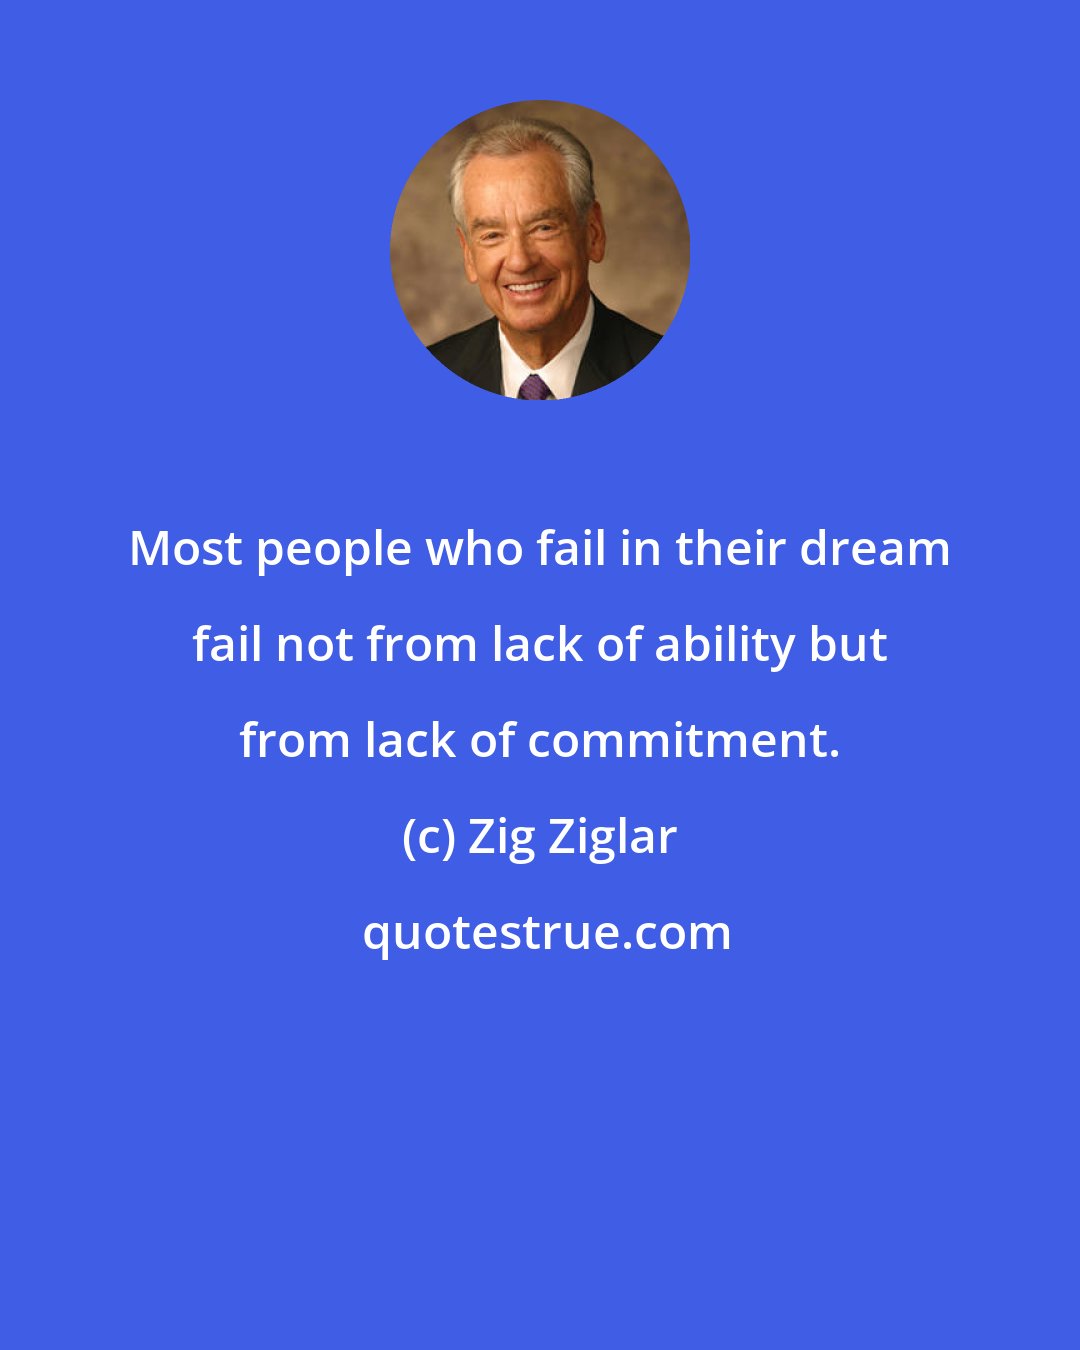 Zig Ziglar: Most people who fail in their dream fail not from lack of ability but from lack of commitment.